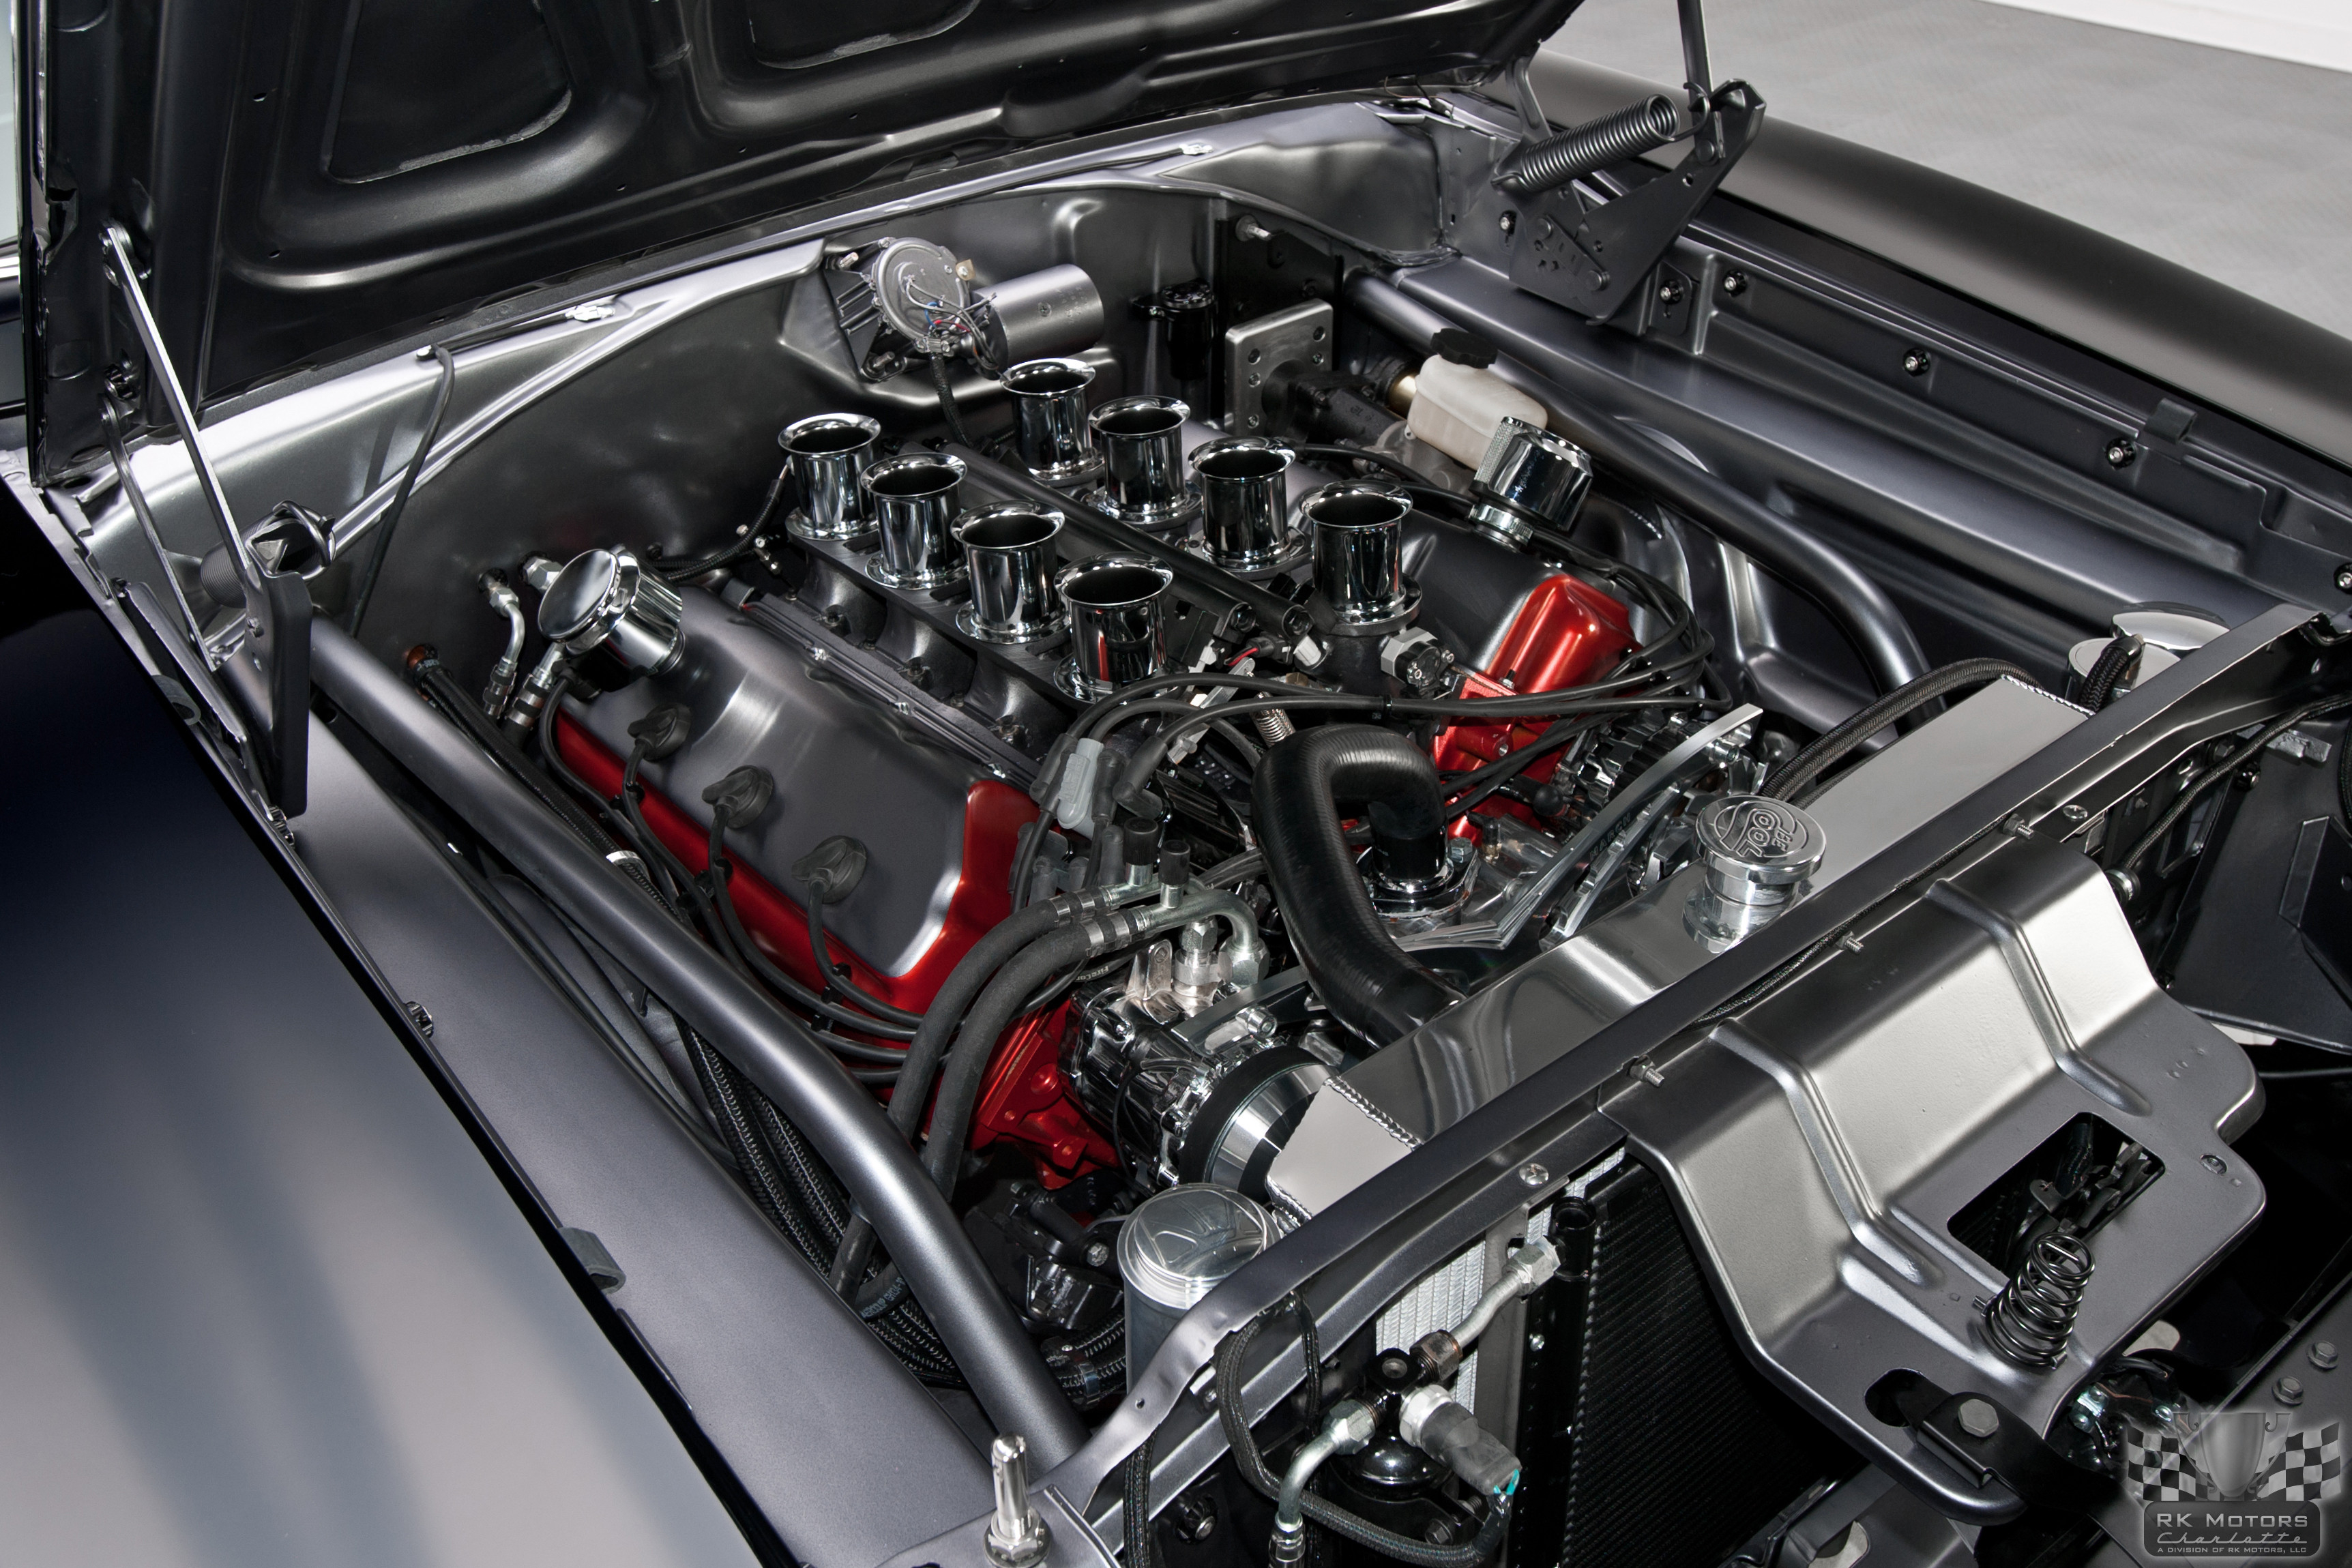 Charger R-t Indy 426 Hemi Muscle Cars Hot Rod Engine - Muscle Car , HD Wallpaper & Backgrounds